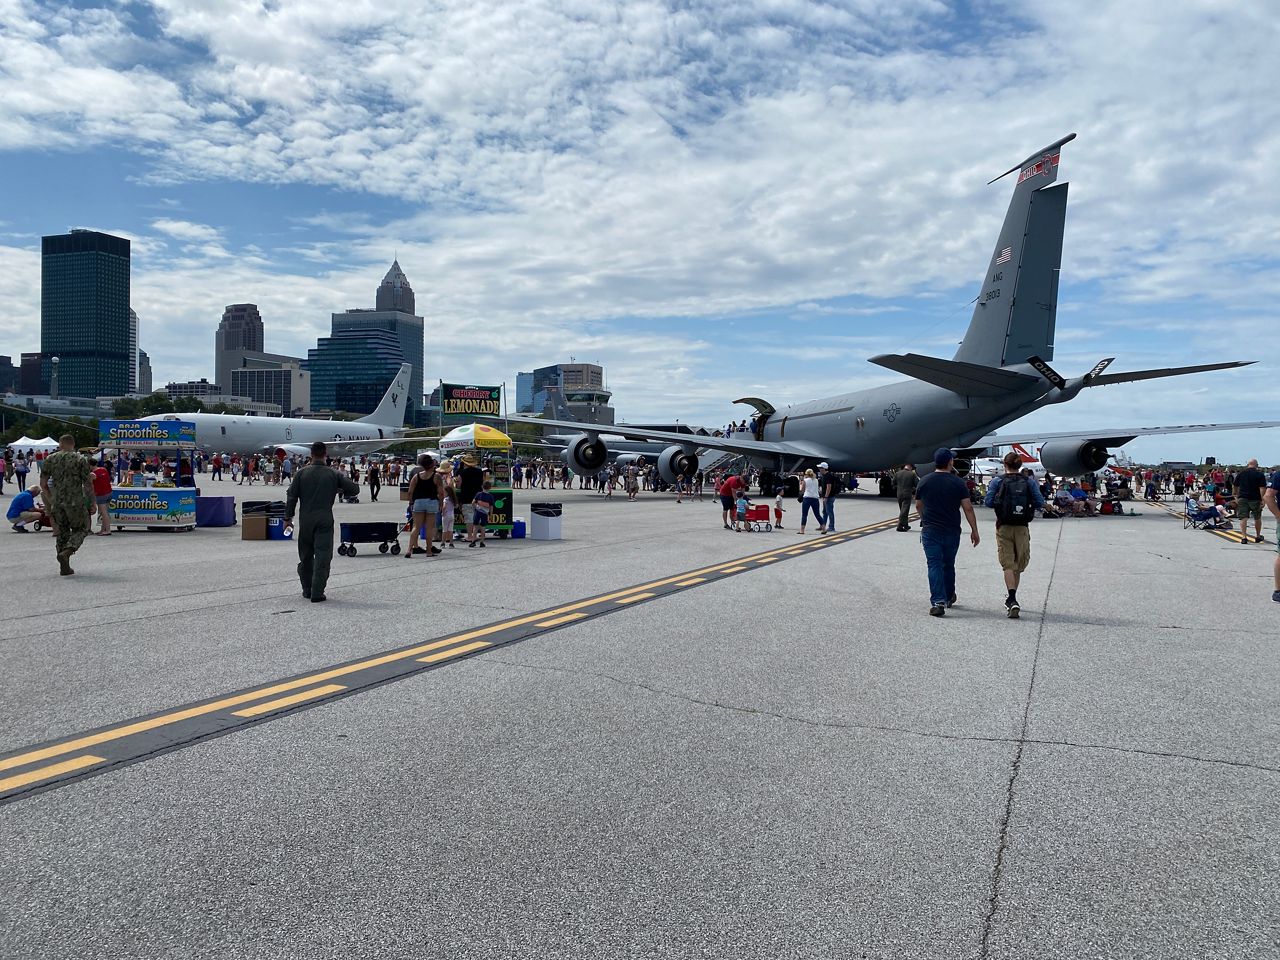 Cleveland Air Show returns after COVID-19 canceled show last year​